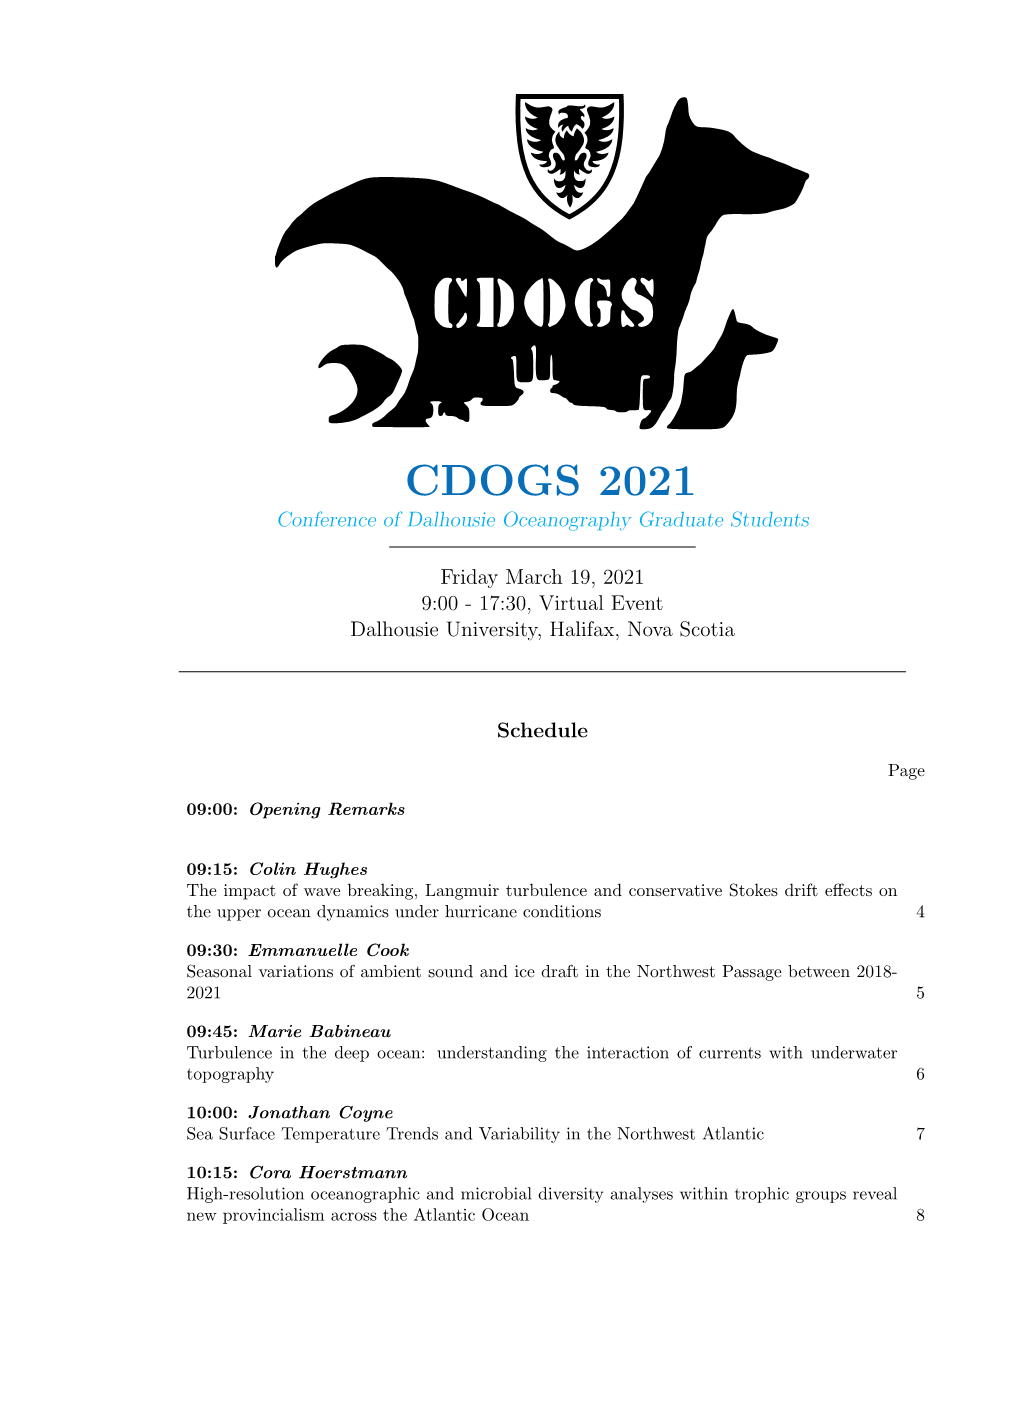 CDOGS 2021 Conference of Dalhousie Oceanography Graduate Students